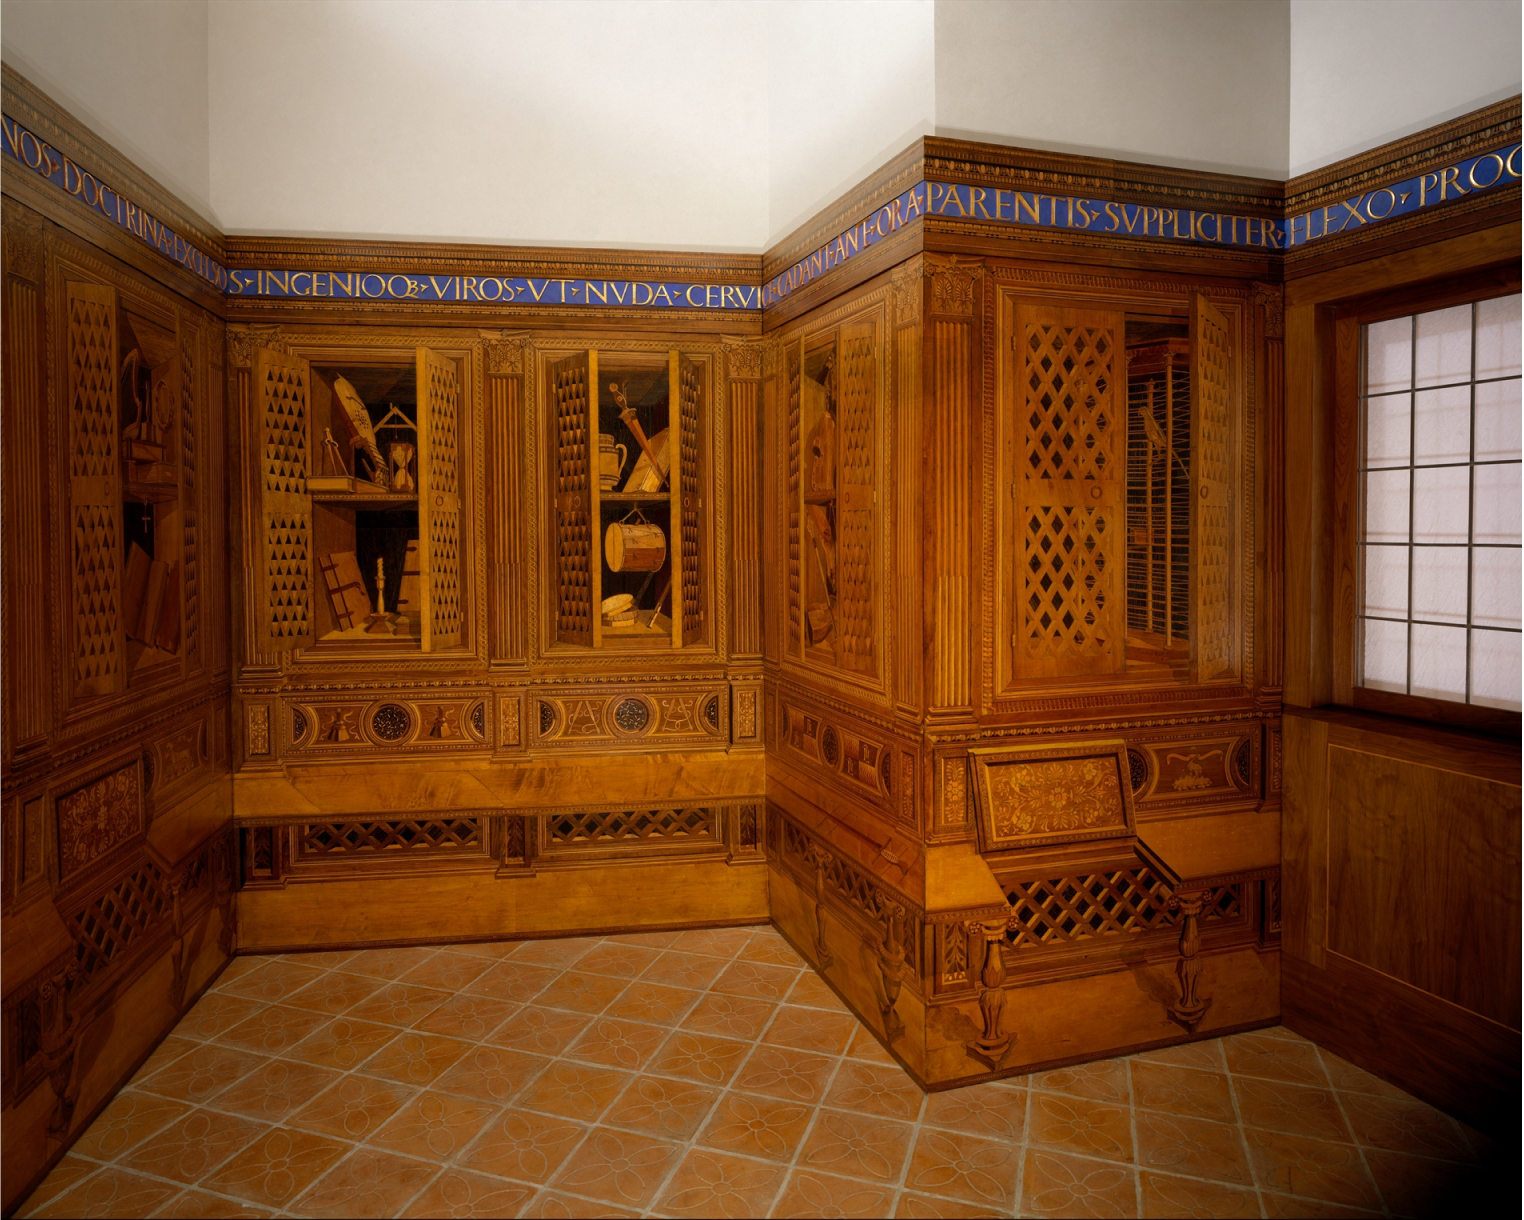 A studio of walls carried out in a wood-inlay technique known as intarsia. The studio showcases cabinets, books and objects reflecting Duke Federico's wide-ranging artistic and scientific interests.